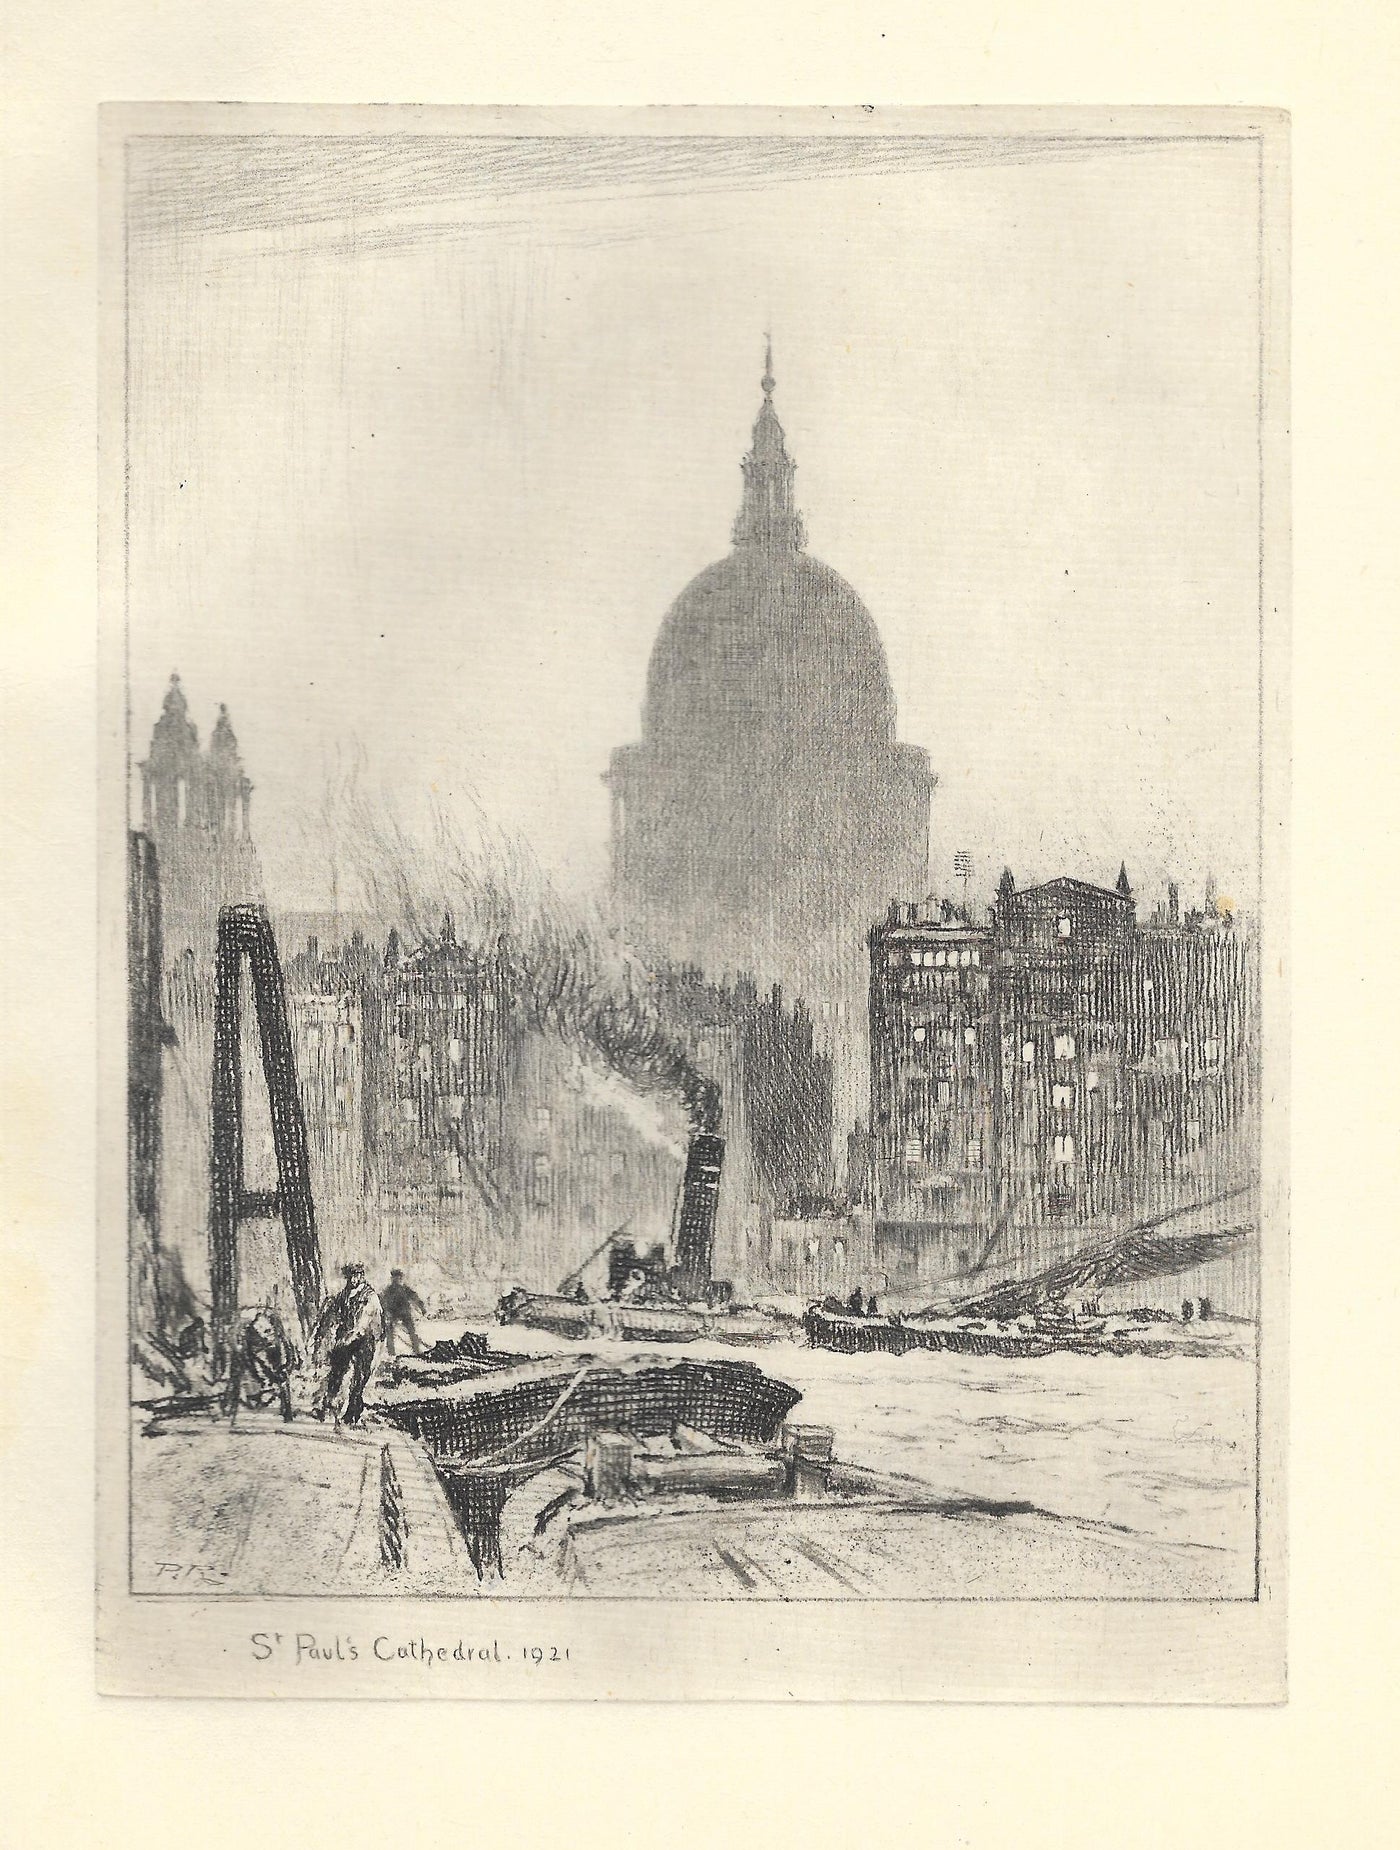 St Paul's Cathedral, London, 1921. Vintage etching by Percy Robertson, published 1930.